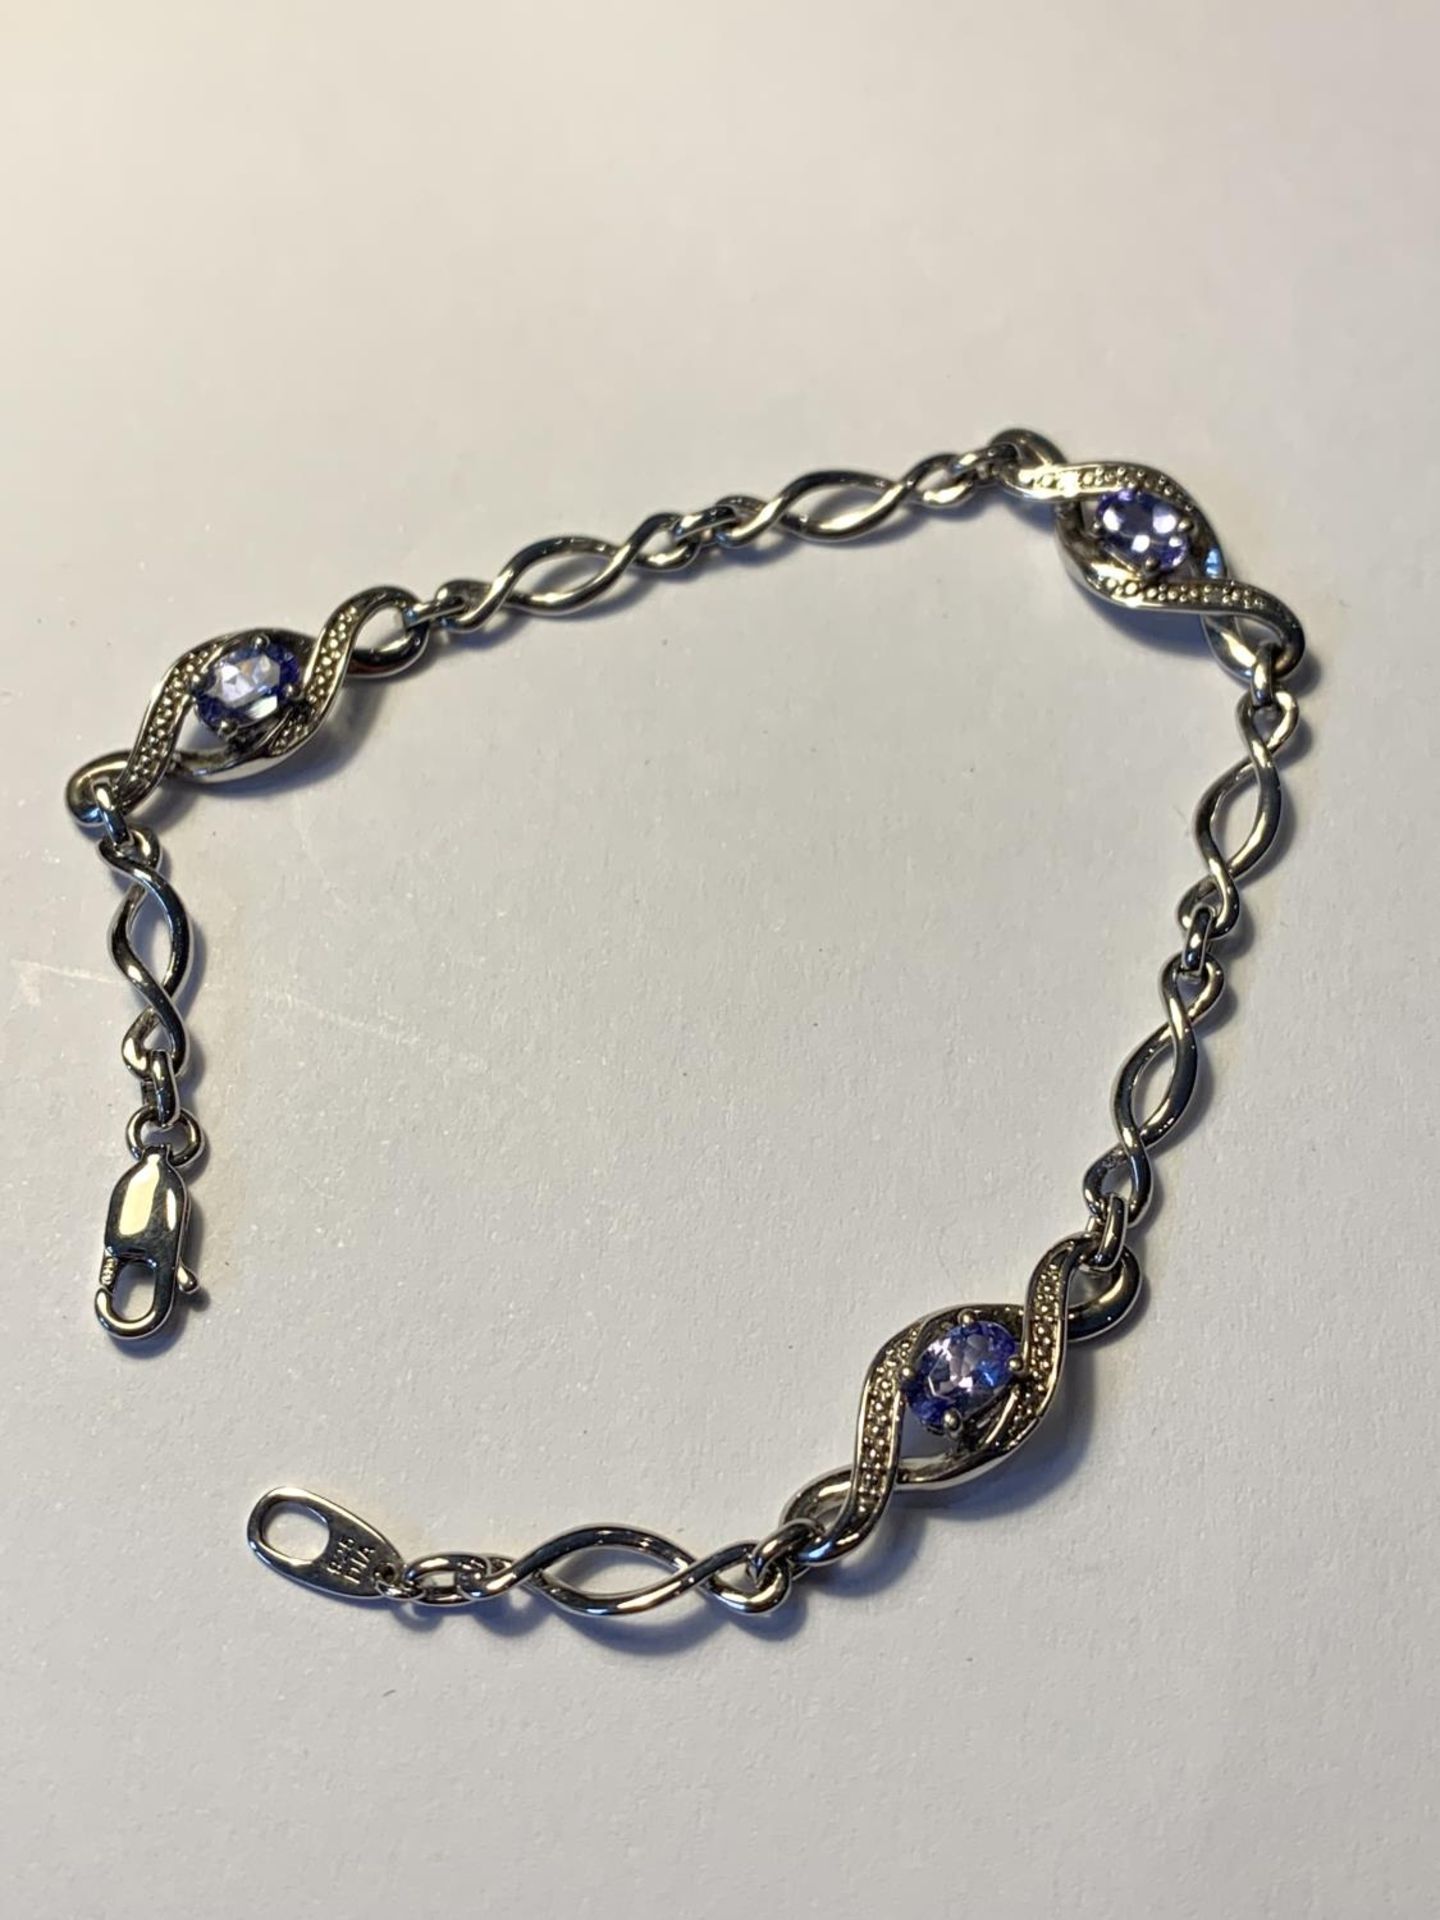 A SILVER BRACELET WITH POSSIBLY AQUAMARINES AND DIAMOND CHIPS IN A PRESENTATION BOX